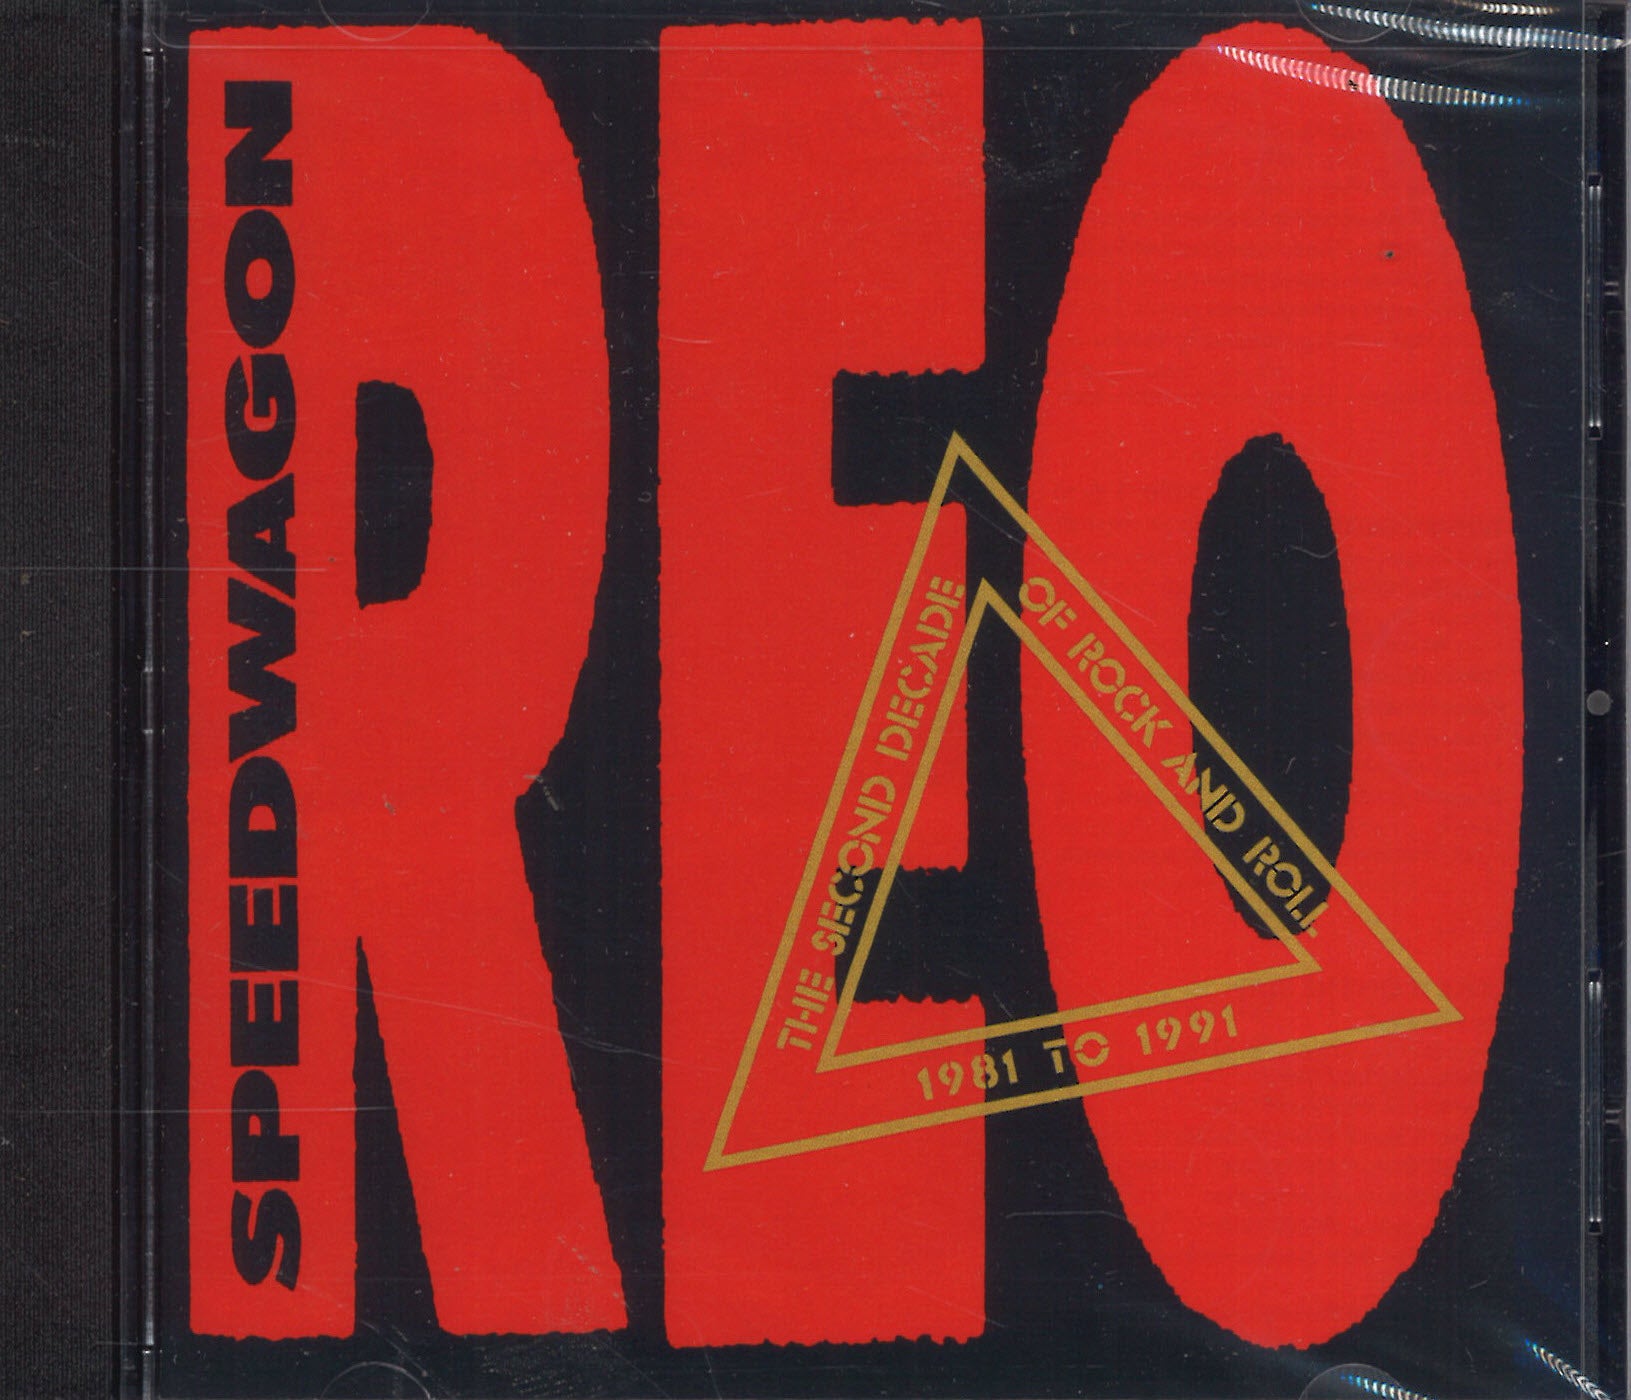 REO Speedwagon The Second Decade Of Rock And Roll 1981 To 1991